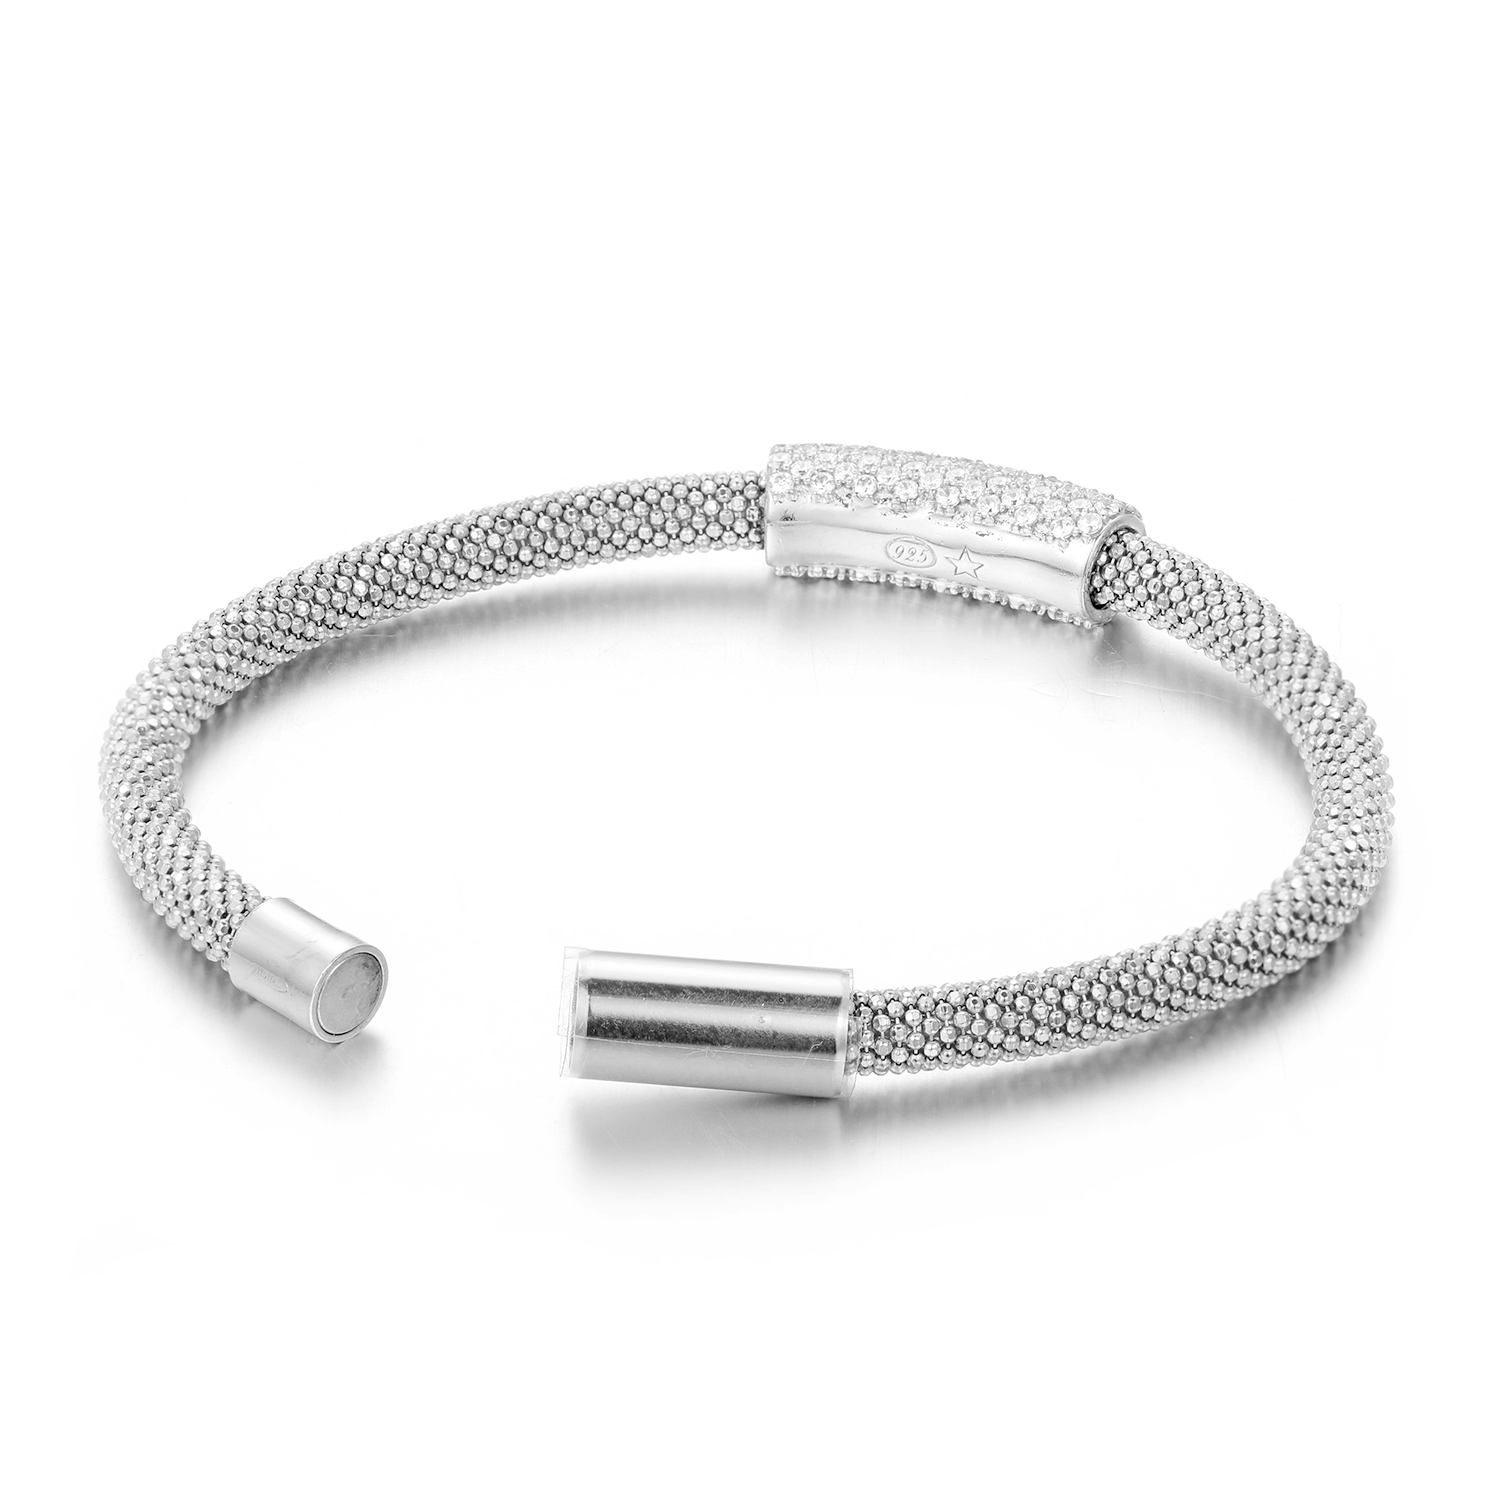 Fine 4.5mm White Rhodium Plated Silver CZ Magnet Bangle Bracelet made in italy